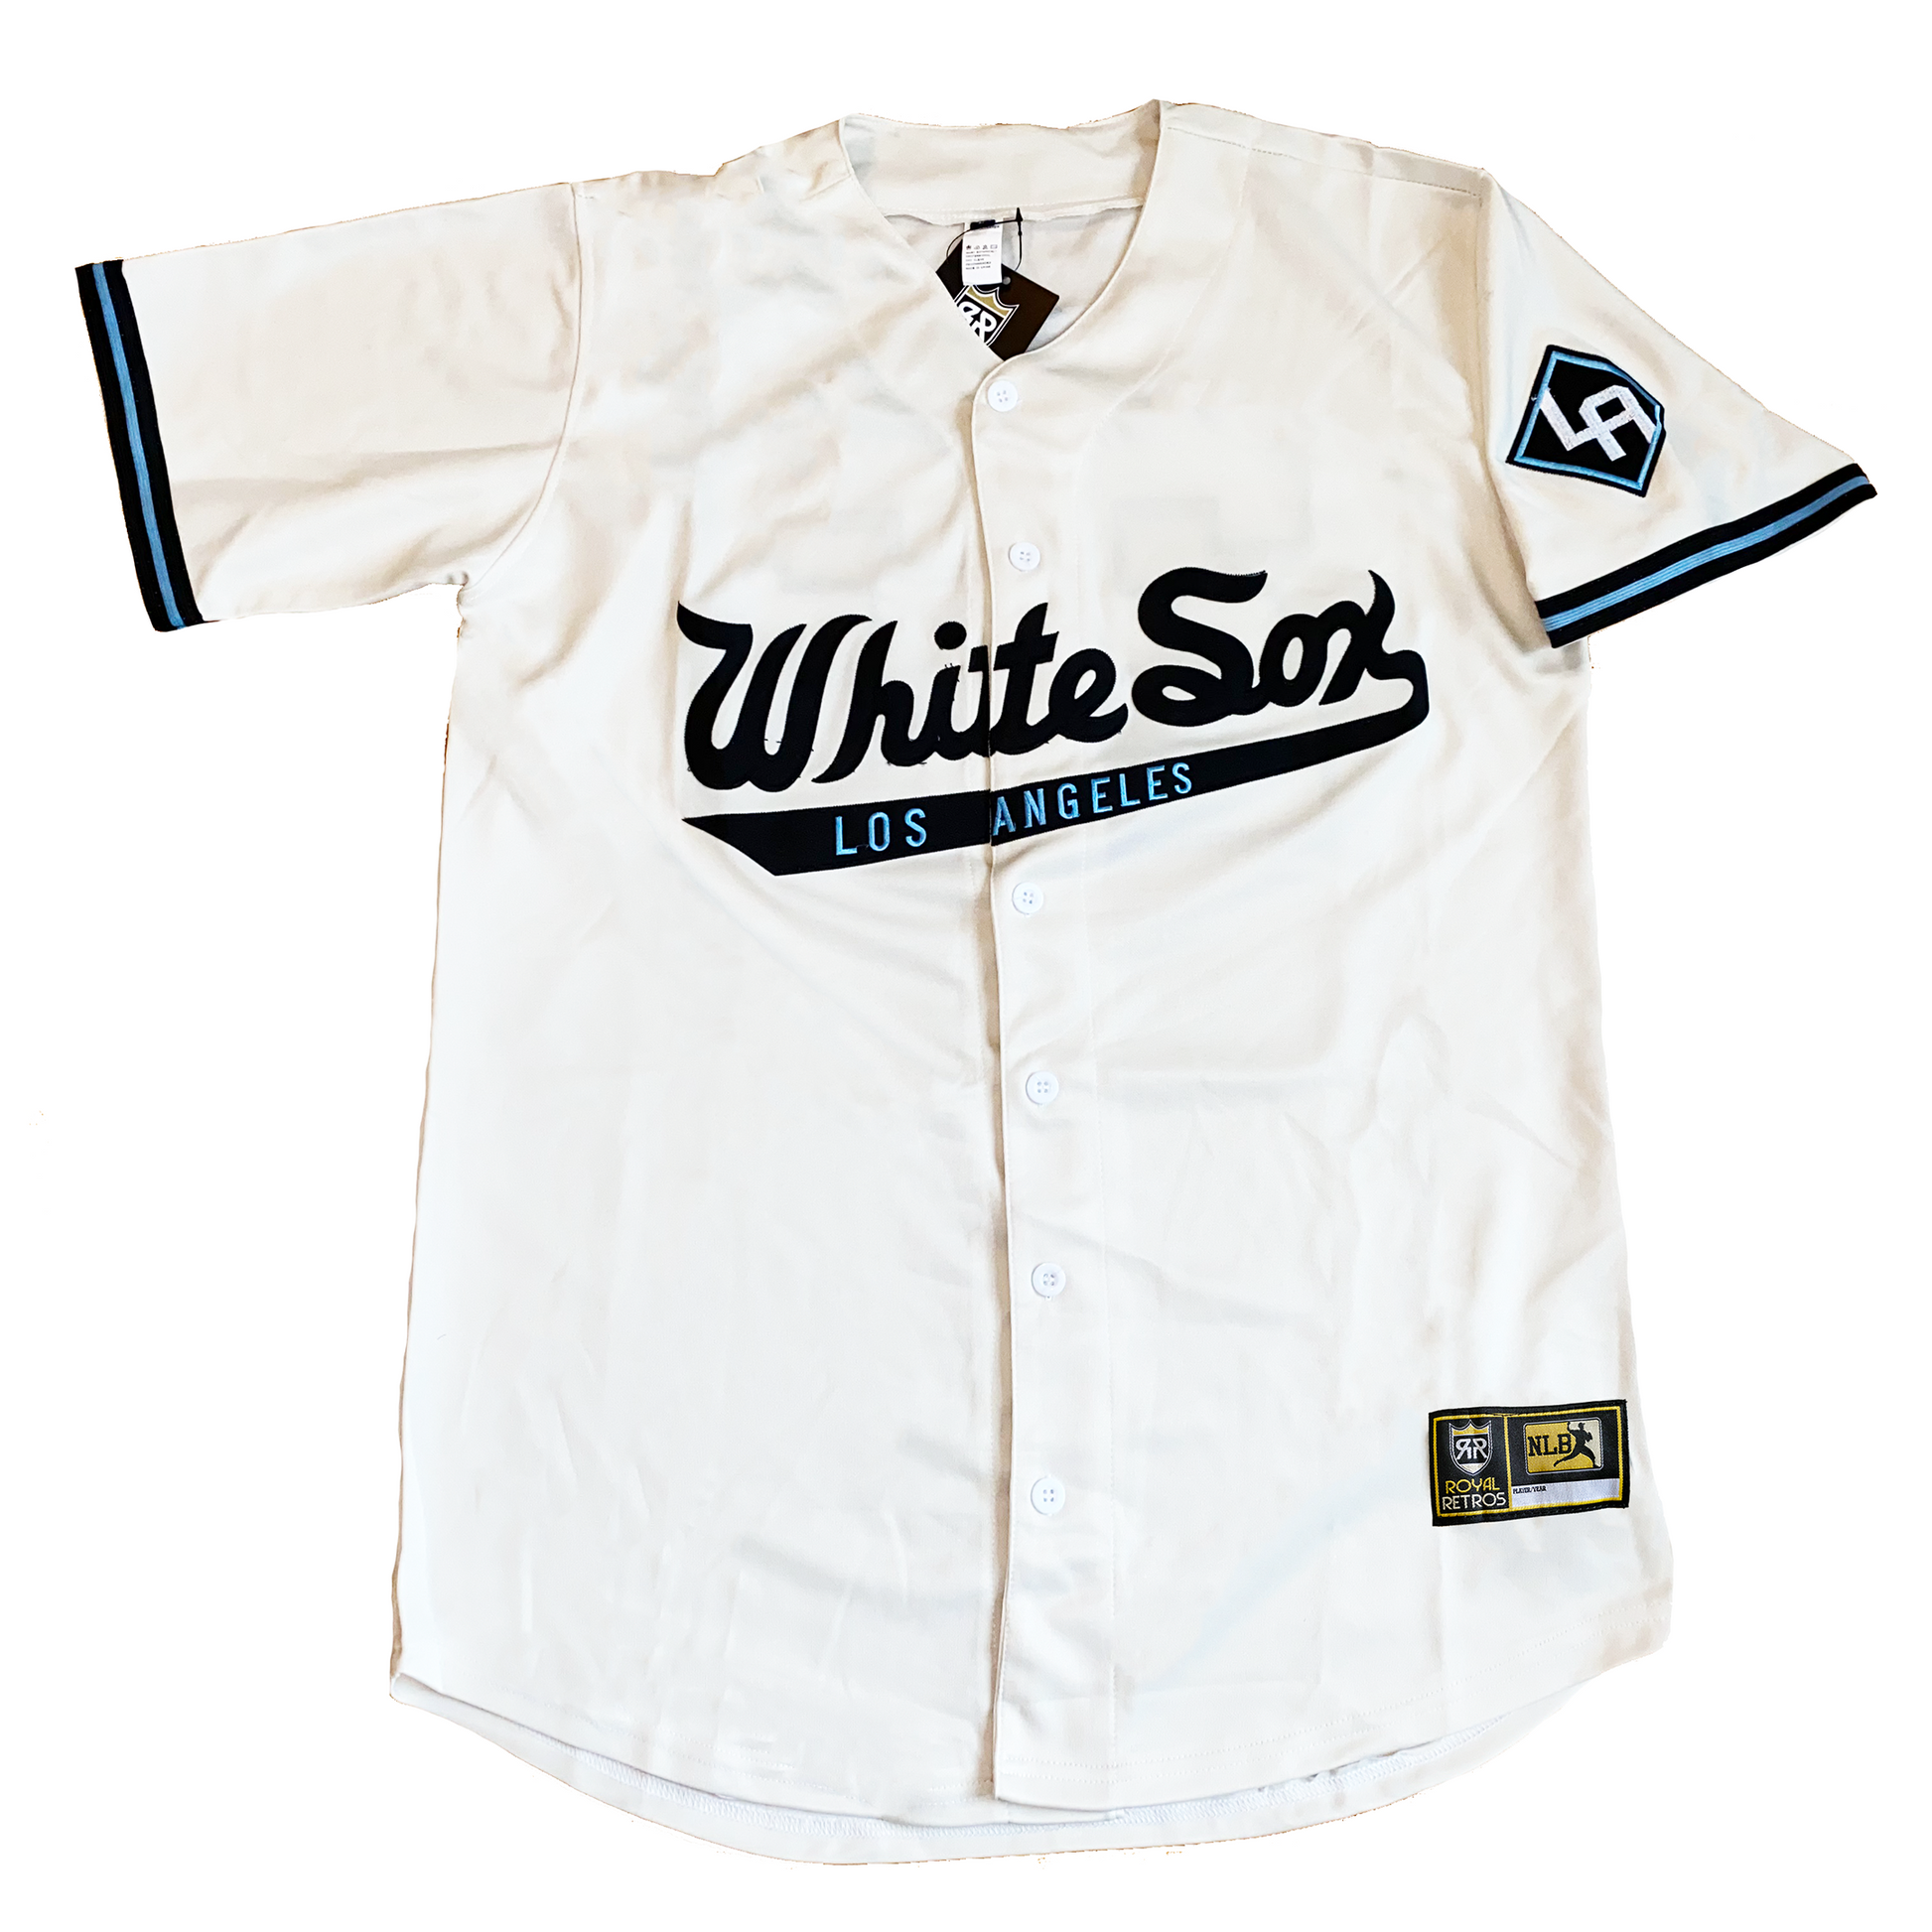 Vintage Chicago White Sox Baseball Jersey Authentic Sewn Made in USA